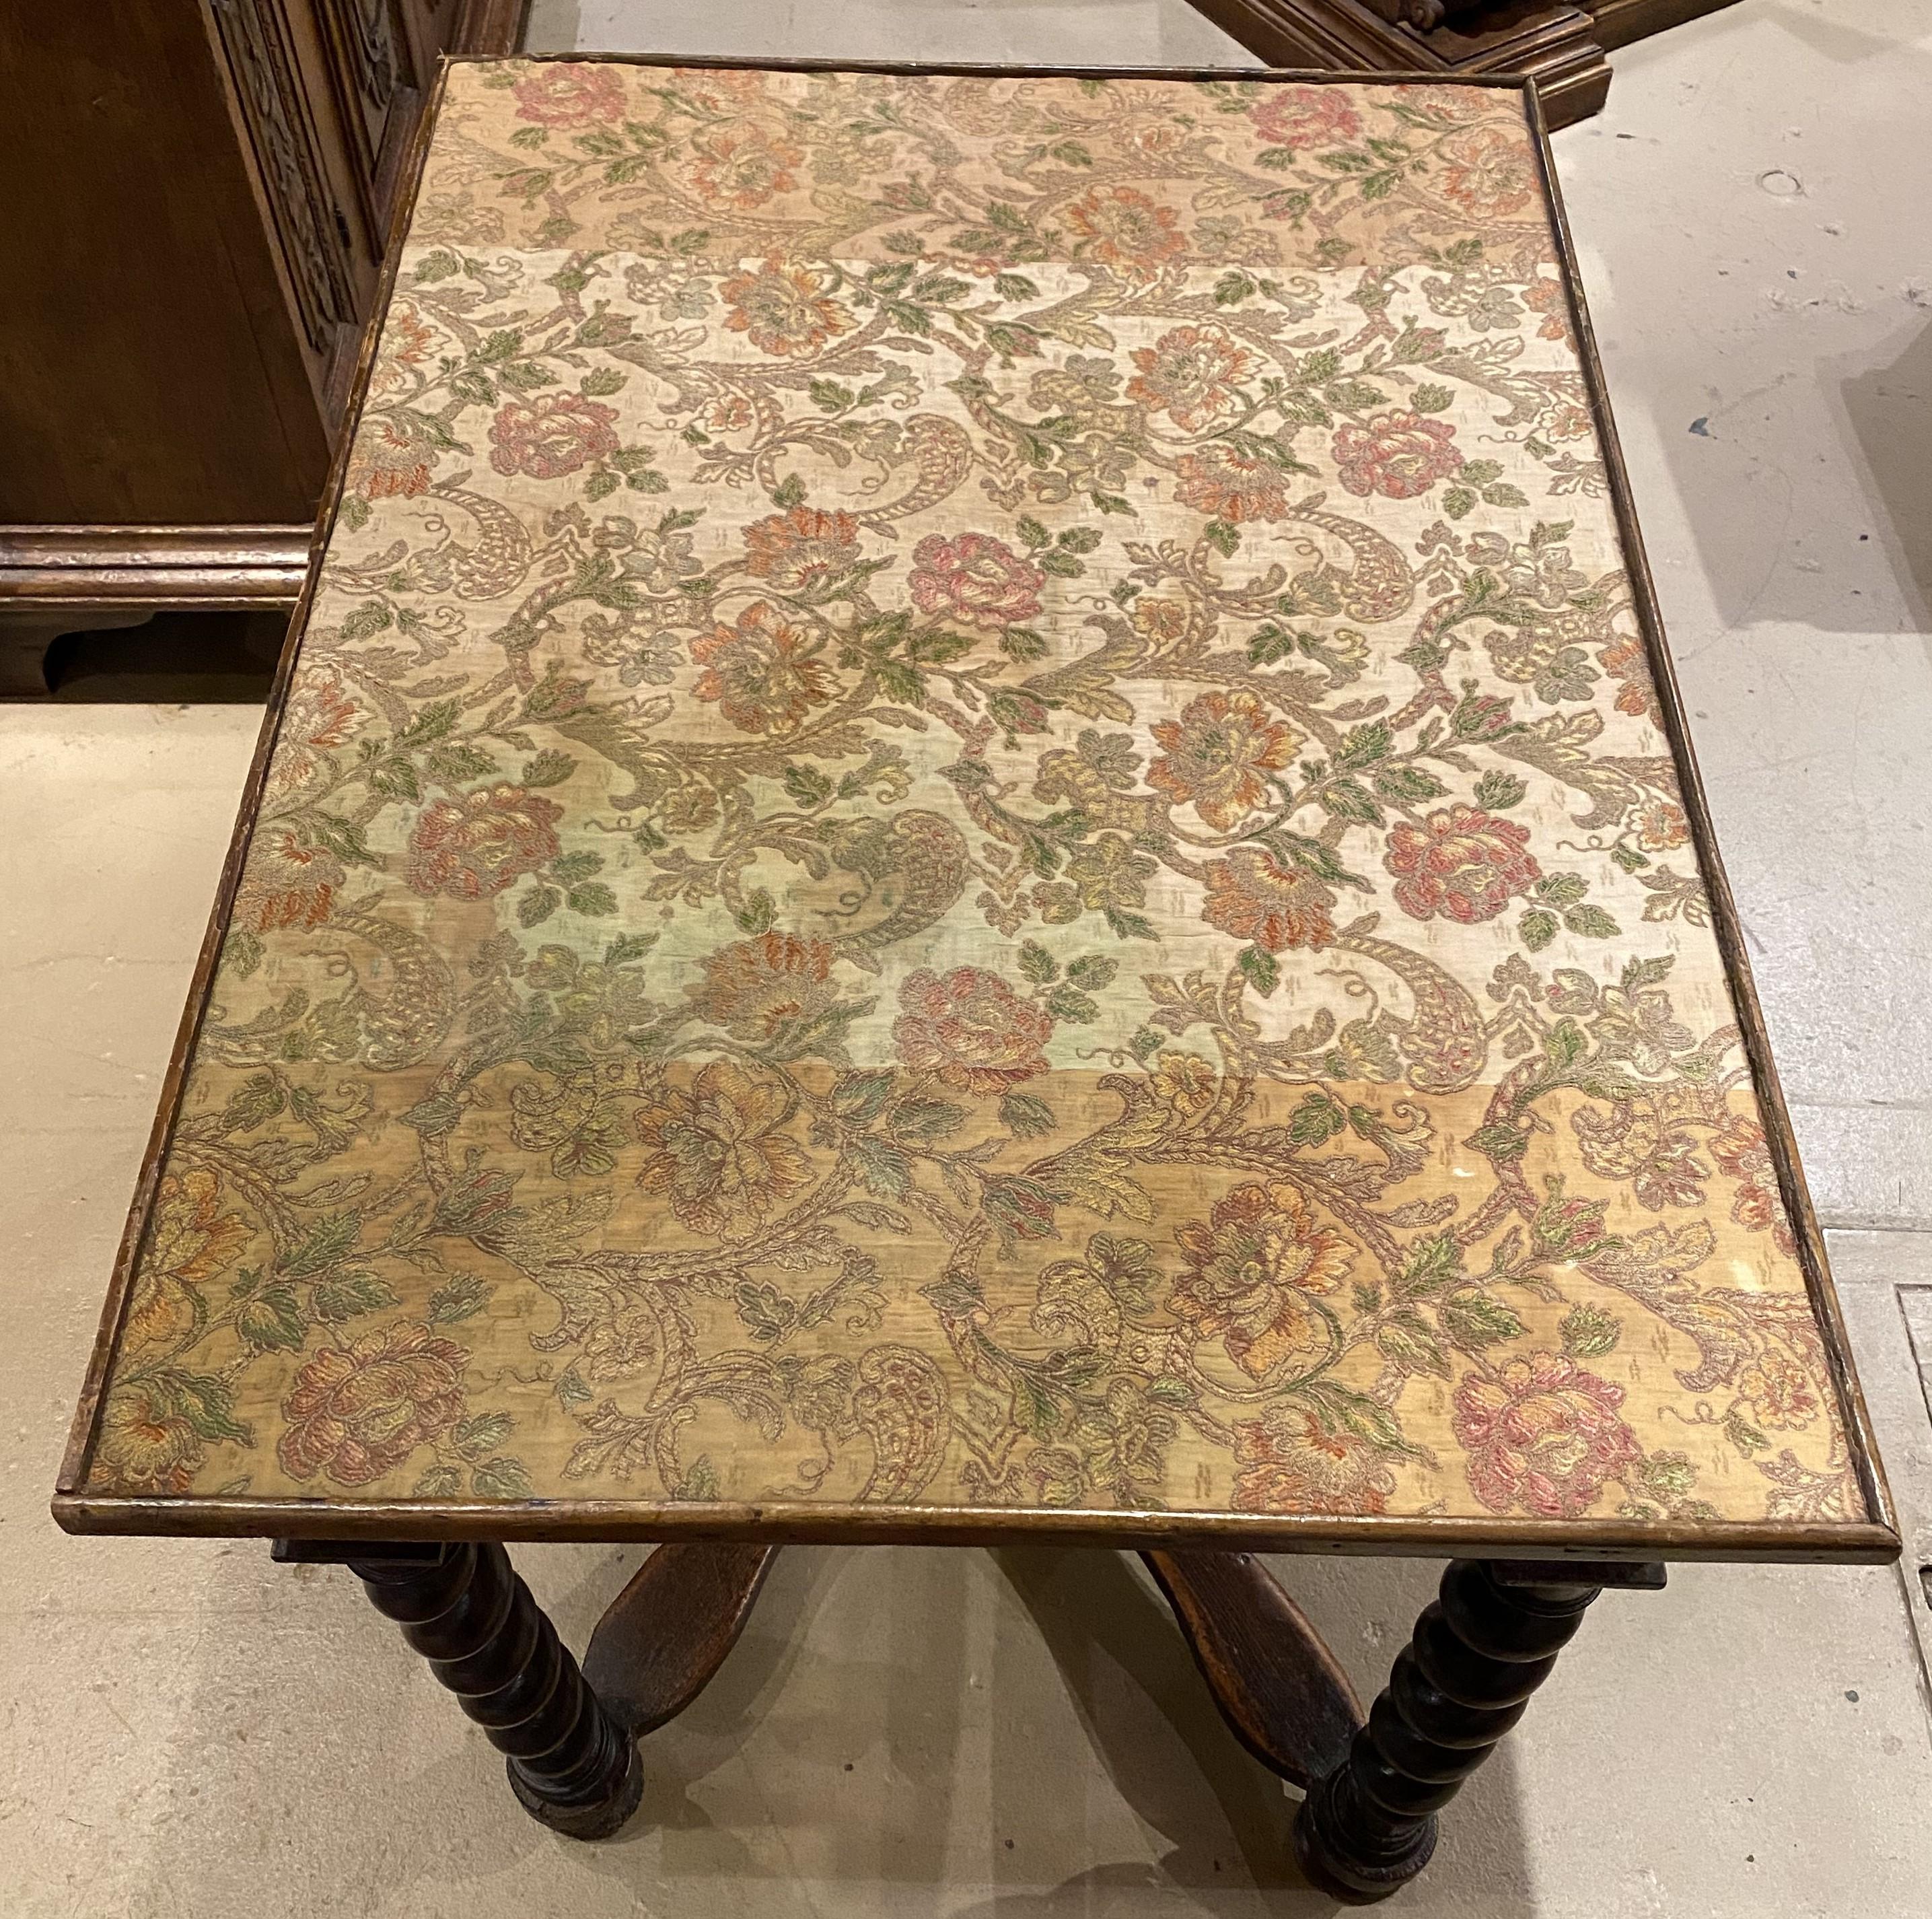 A fine example of a Continental fruitwood rectangular table with foliate needlework fabric lined top with wooden border, a scrollwork inlaid frieze drawer, additional foliate carved frieze decoration, supported by four barley twist carved legs and